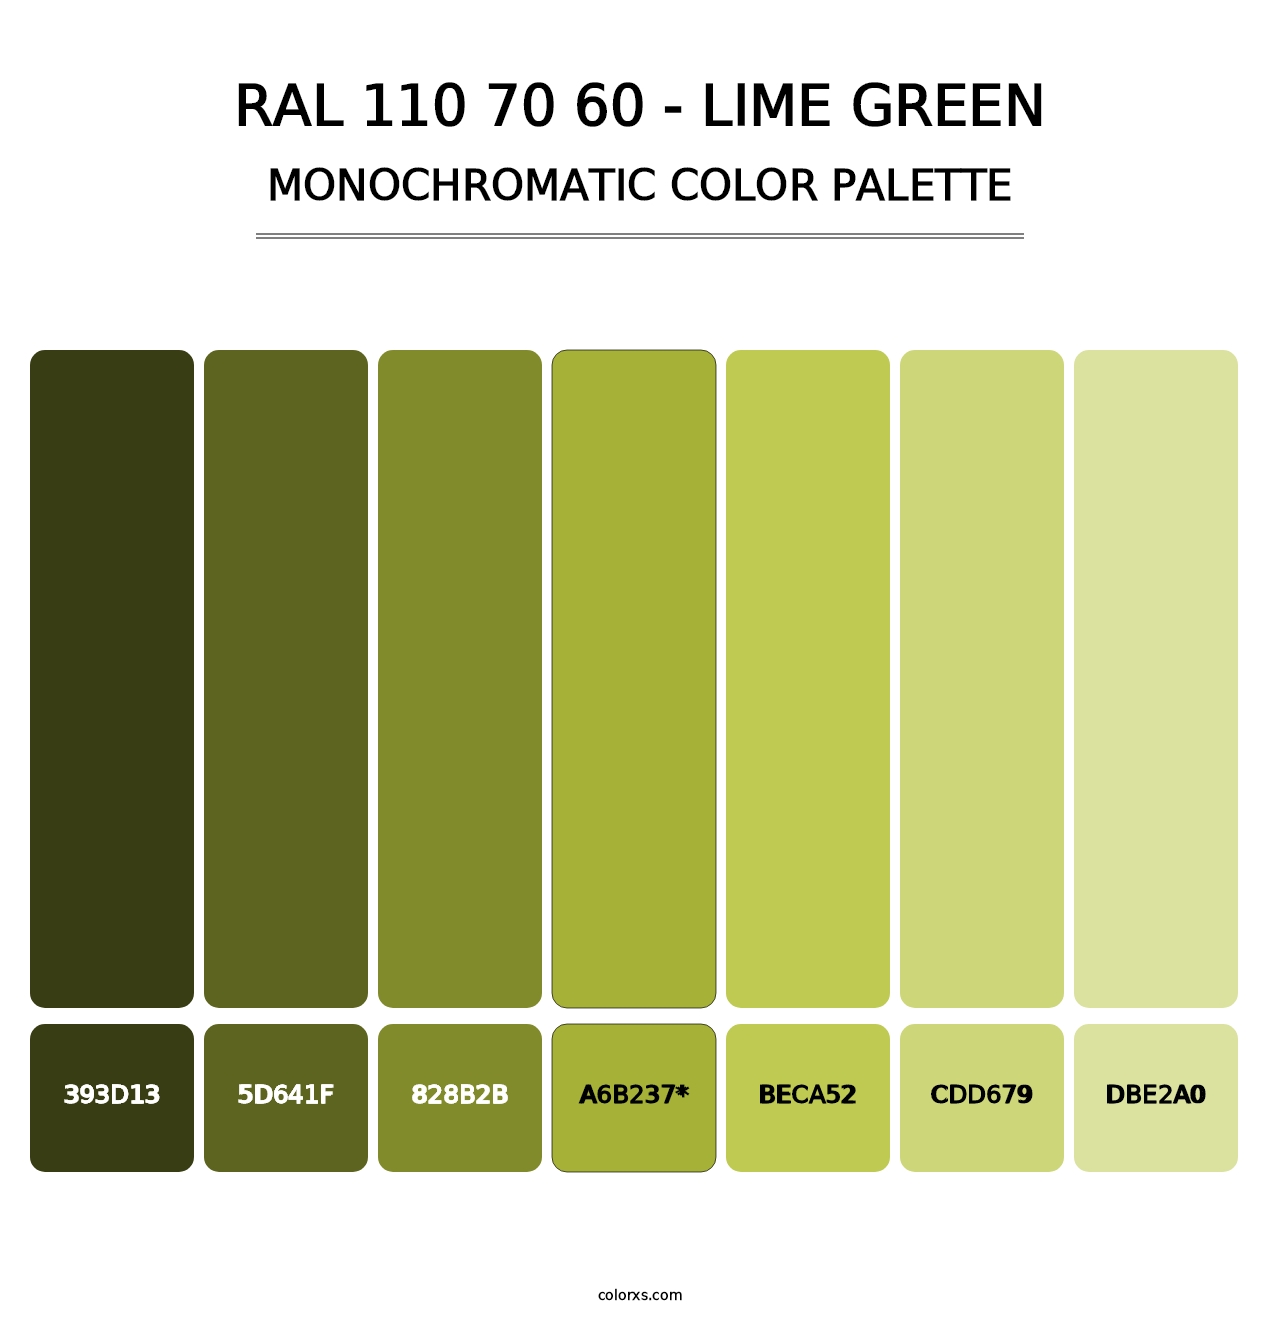 RAL 110 70 60 - Lime Green - Monochromatic Color Palette